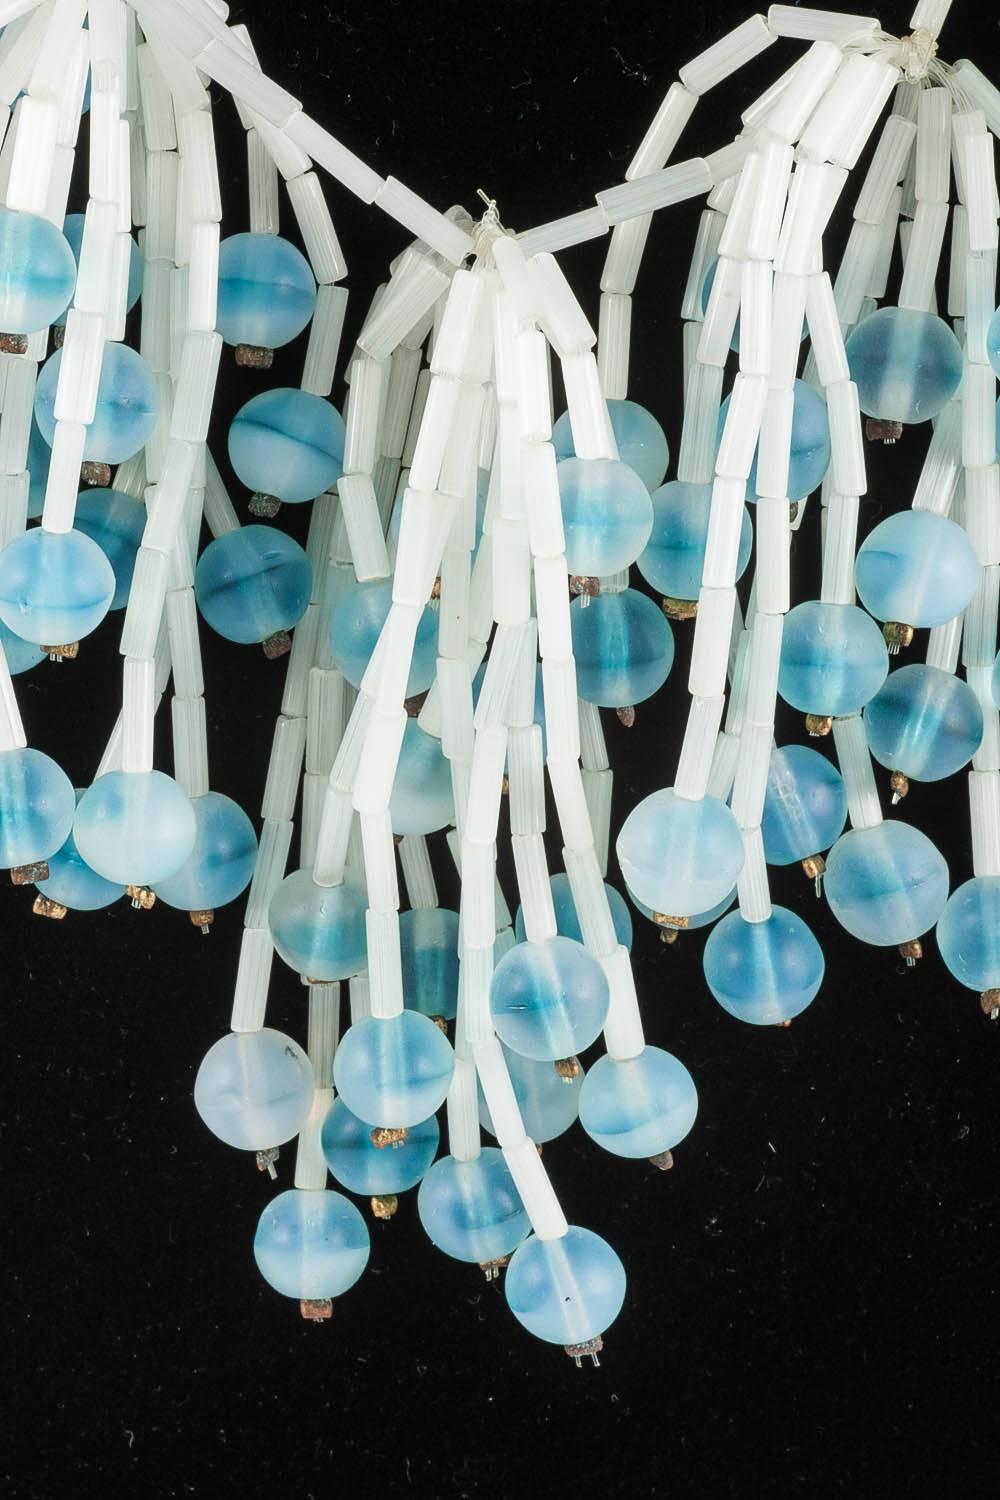 A delicious necklace from Langani, Germany, made from cascading frosted glass tubular beads and frosted round beads with an irregular soft blue tint. The clasp of a large white glass cabuchon is the typical Langani fitting.Similar to their famous